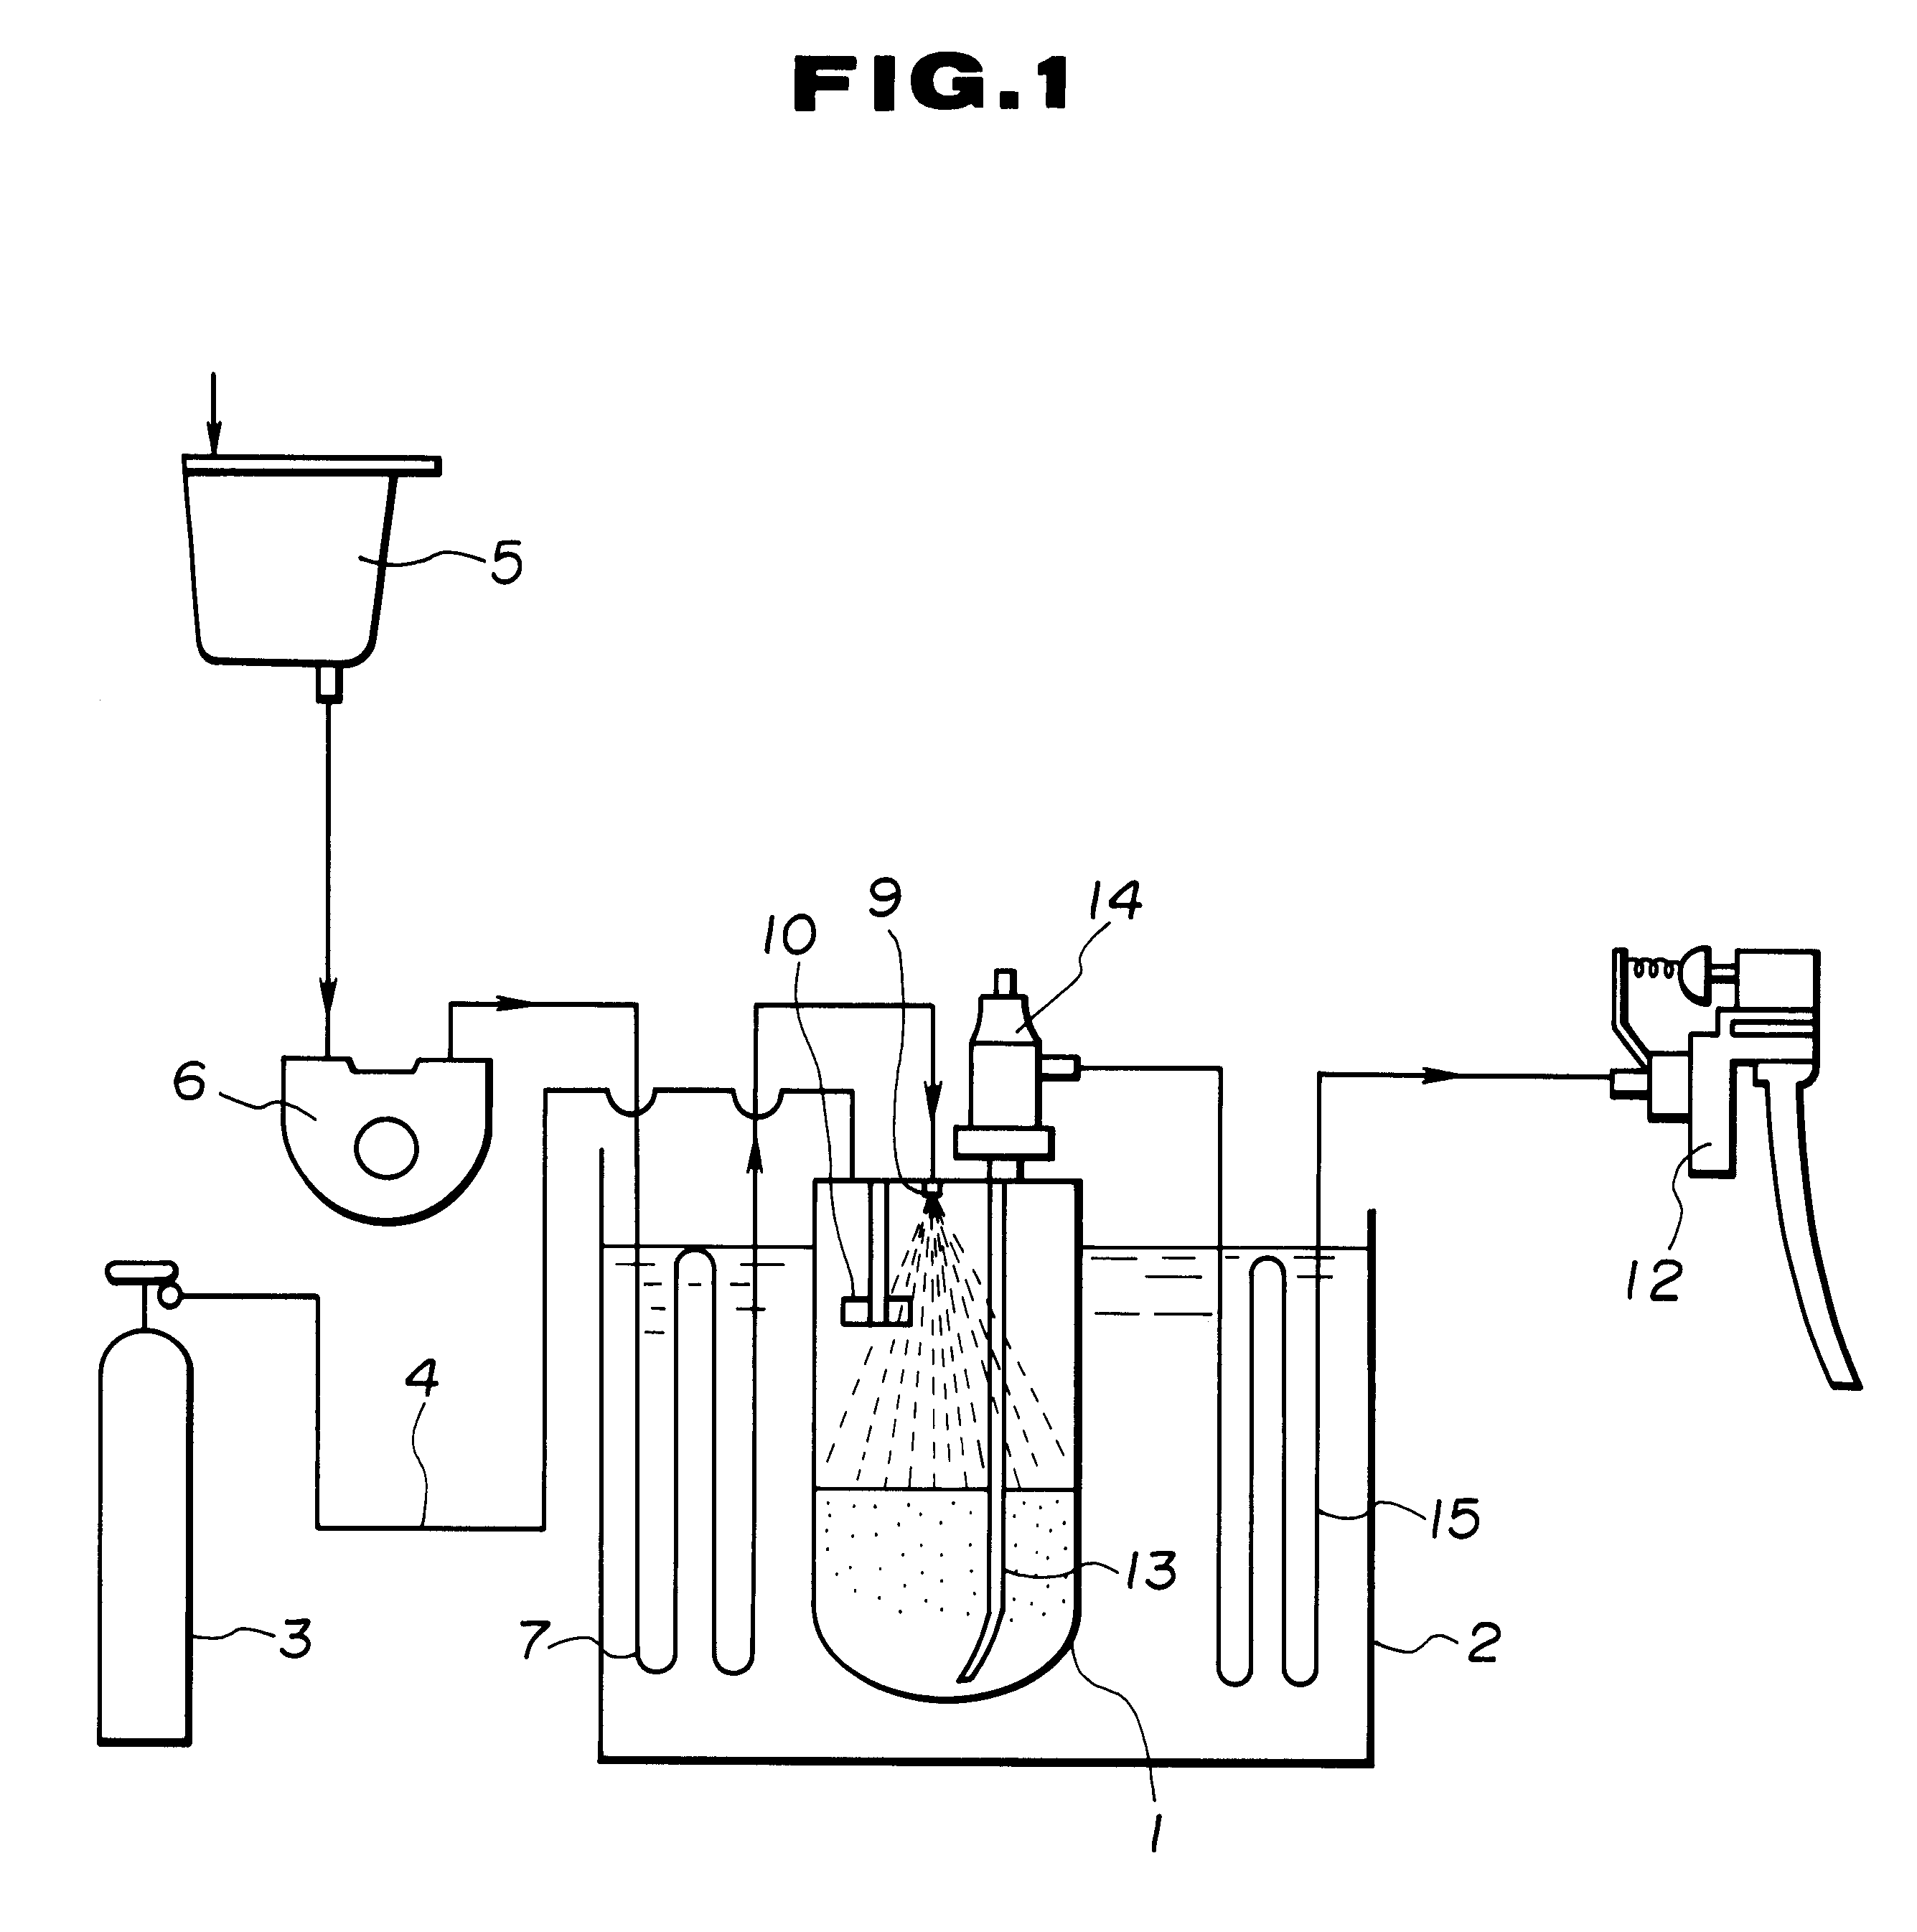 Apparatus for manufacturing carbonated water